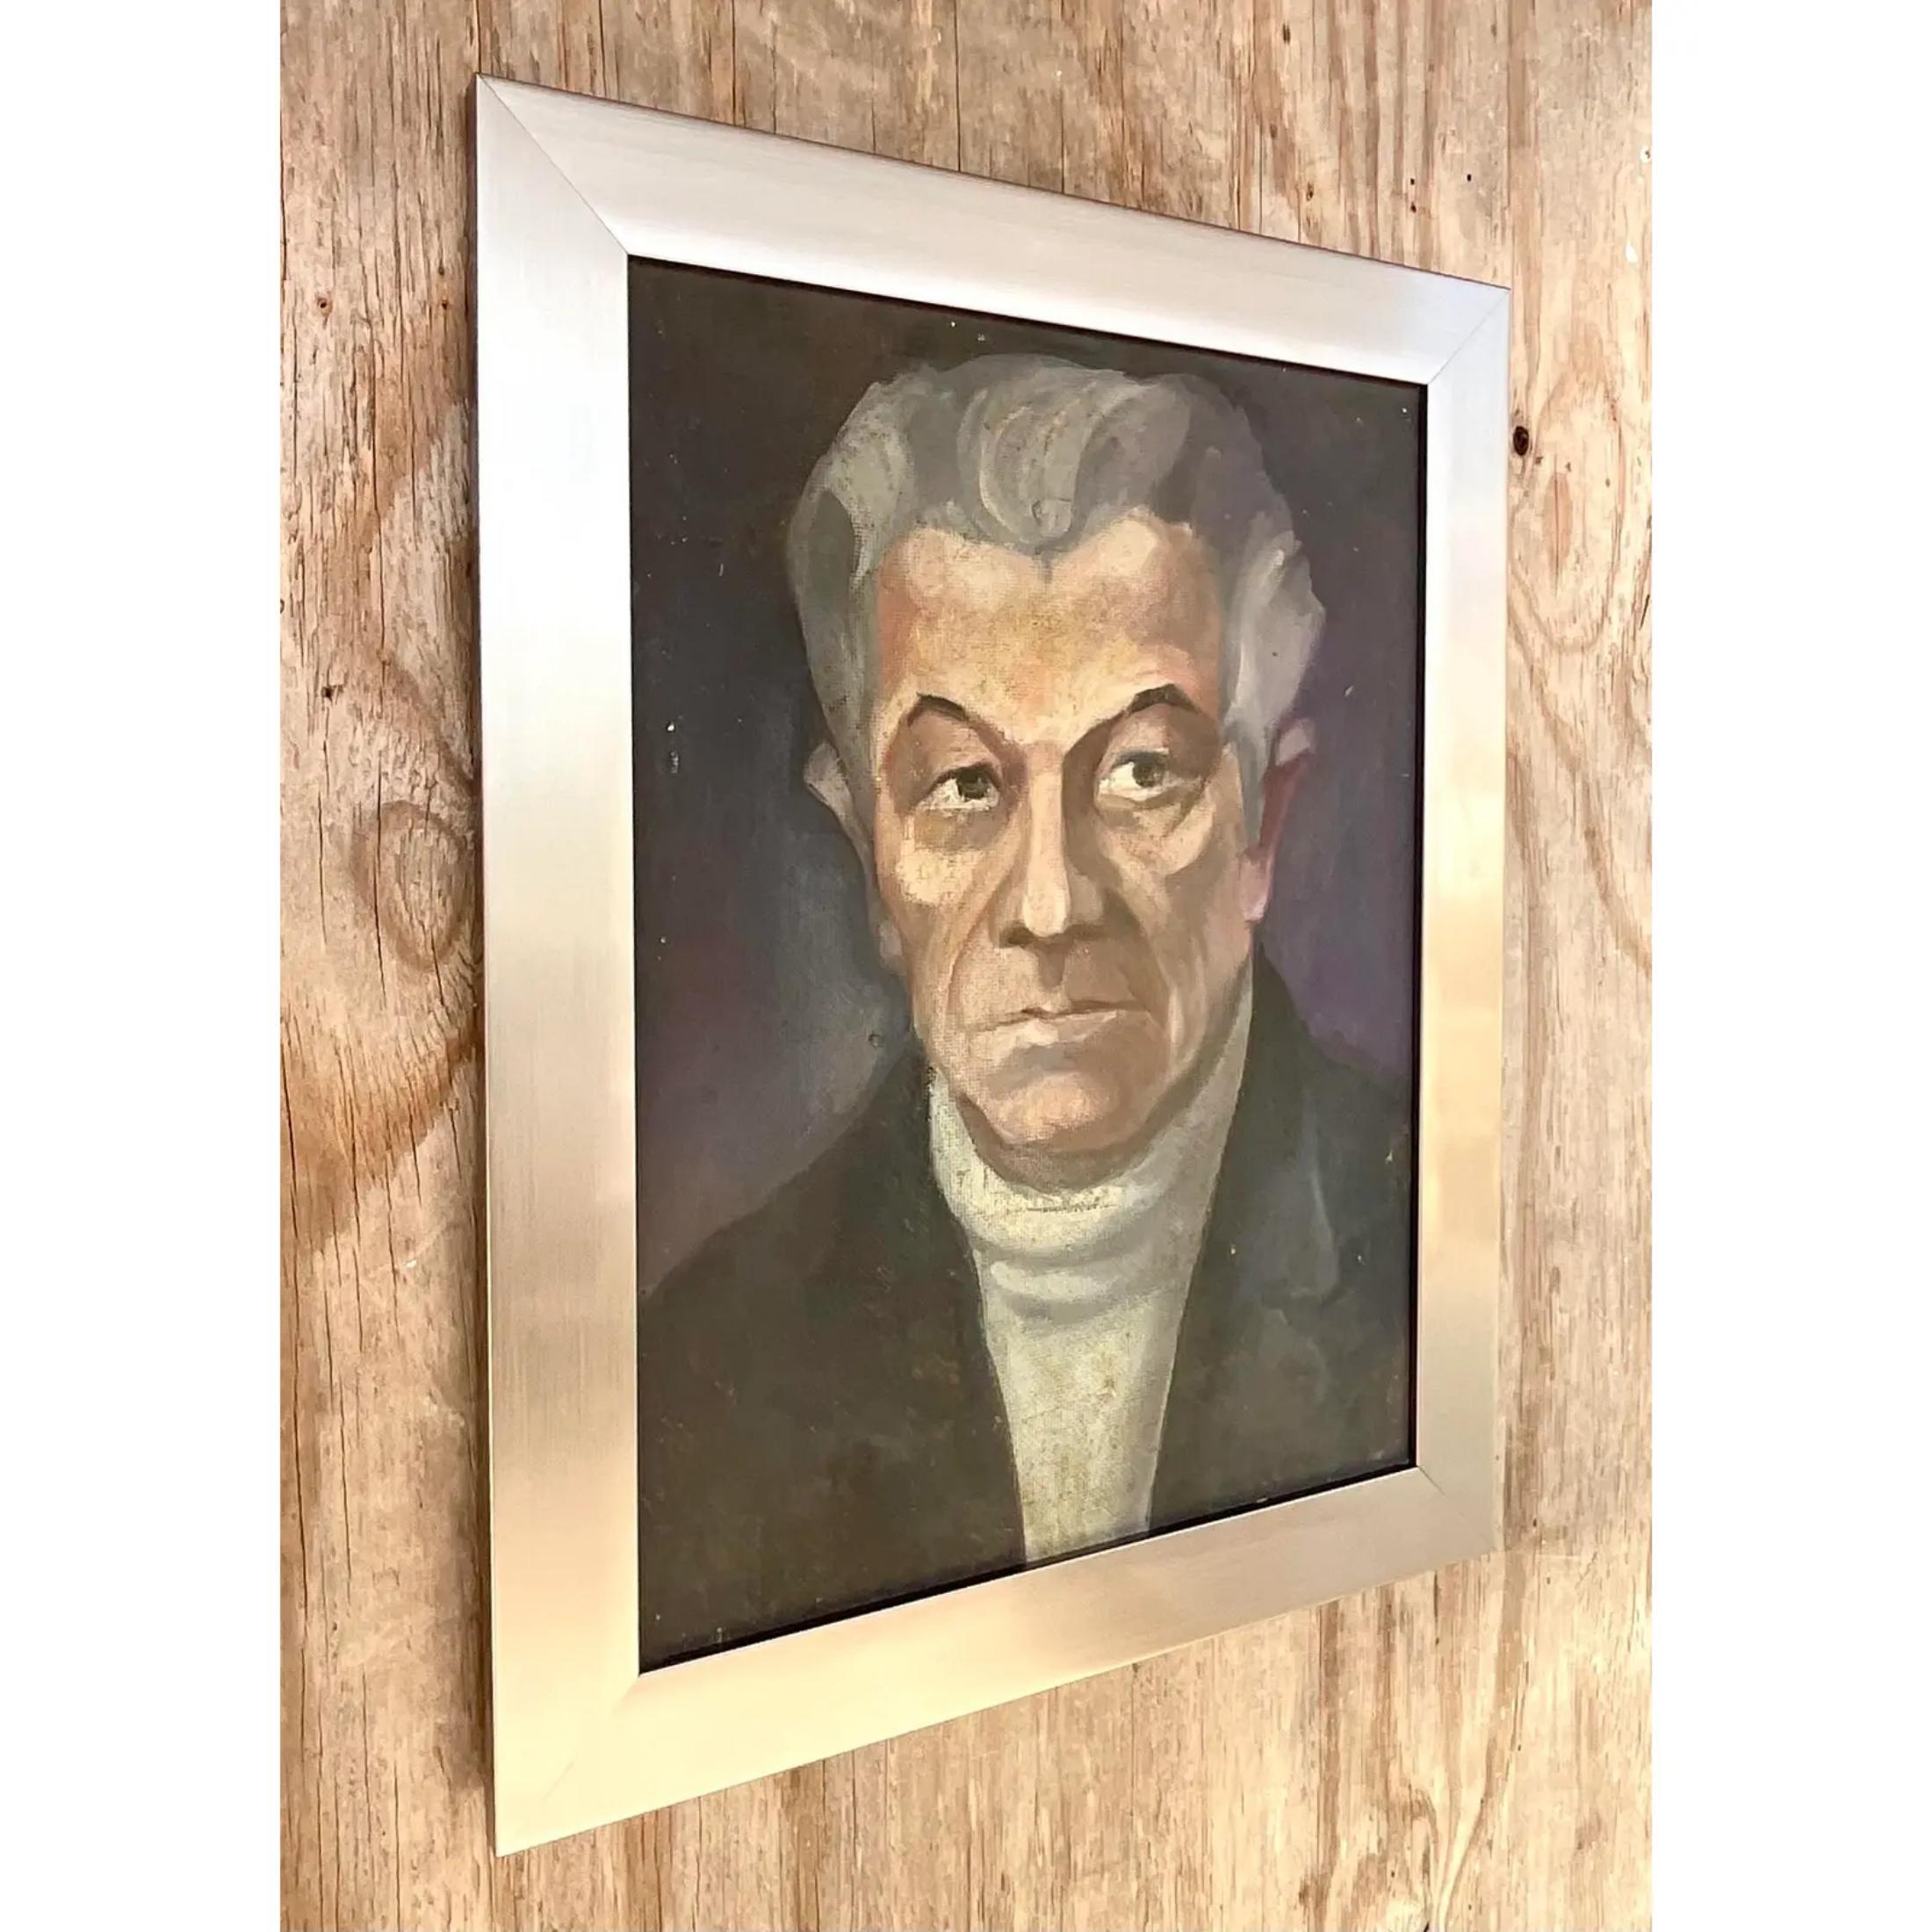 A fantastic vintage original oil portrait. A chic composition of a silver haired gentleman. Newly framed in a brushed silver wood frame. Unsigned. Acquired from a Palm Beach estate